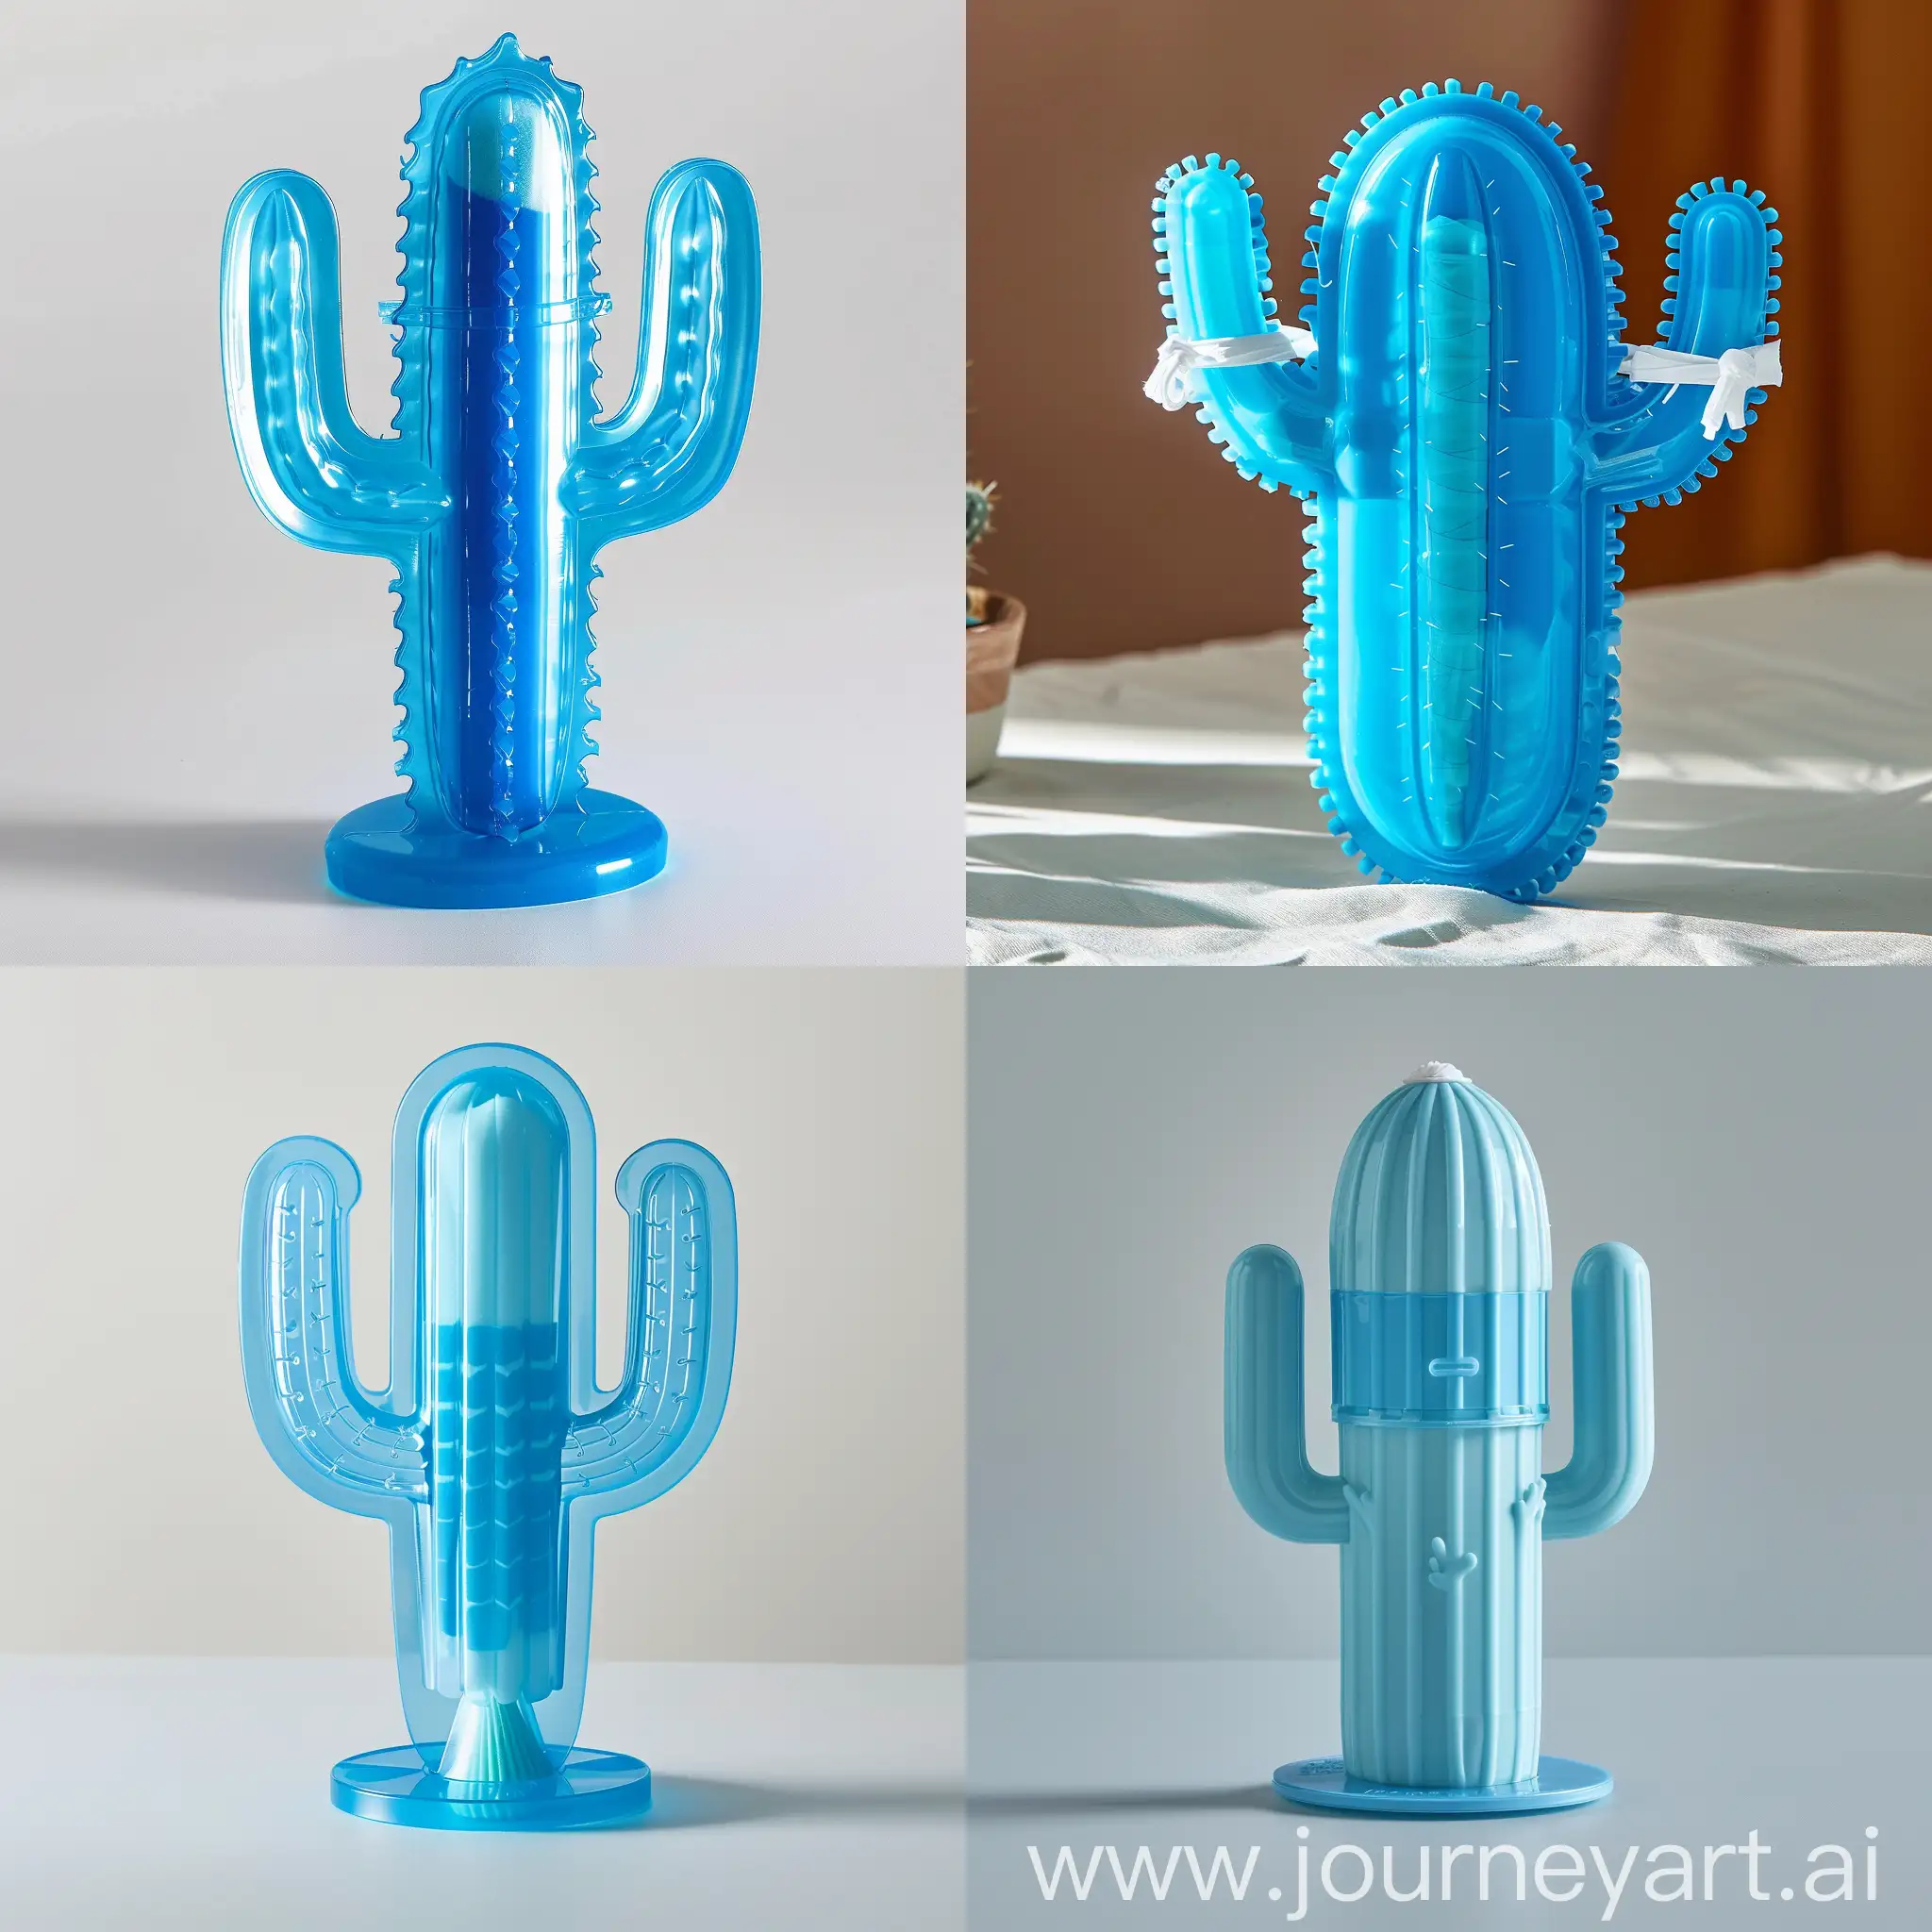 CactusShaped-Tampon-Product-in-Blue-Plastic-Cover